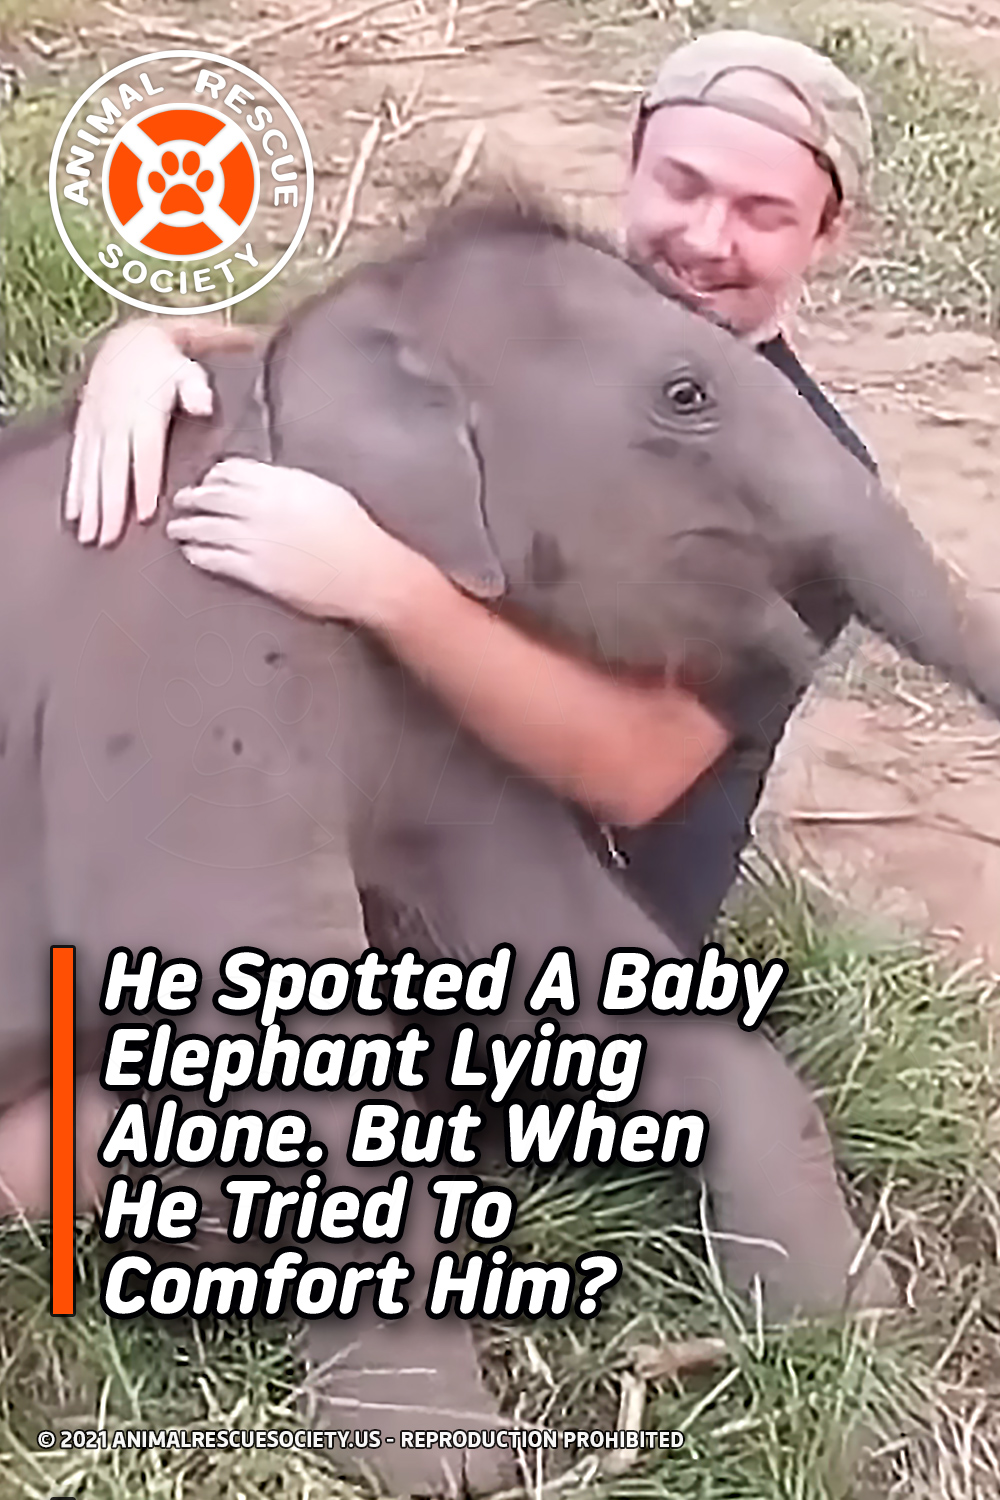 He Spotted A Baby Elephant Lying Alone. But When He Tried To Comfort Him?